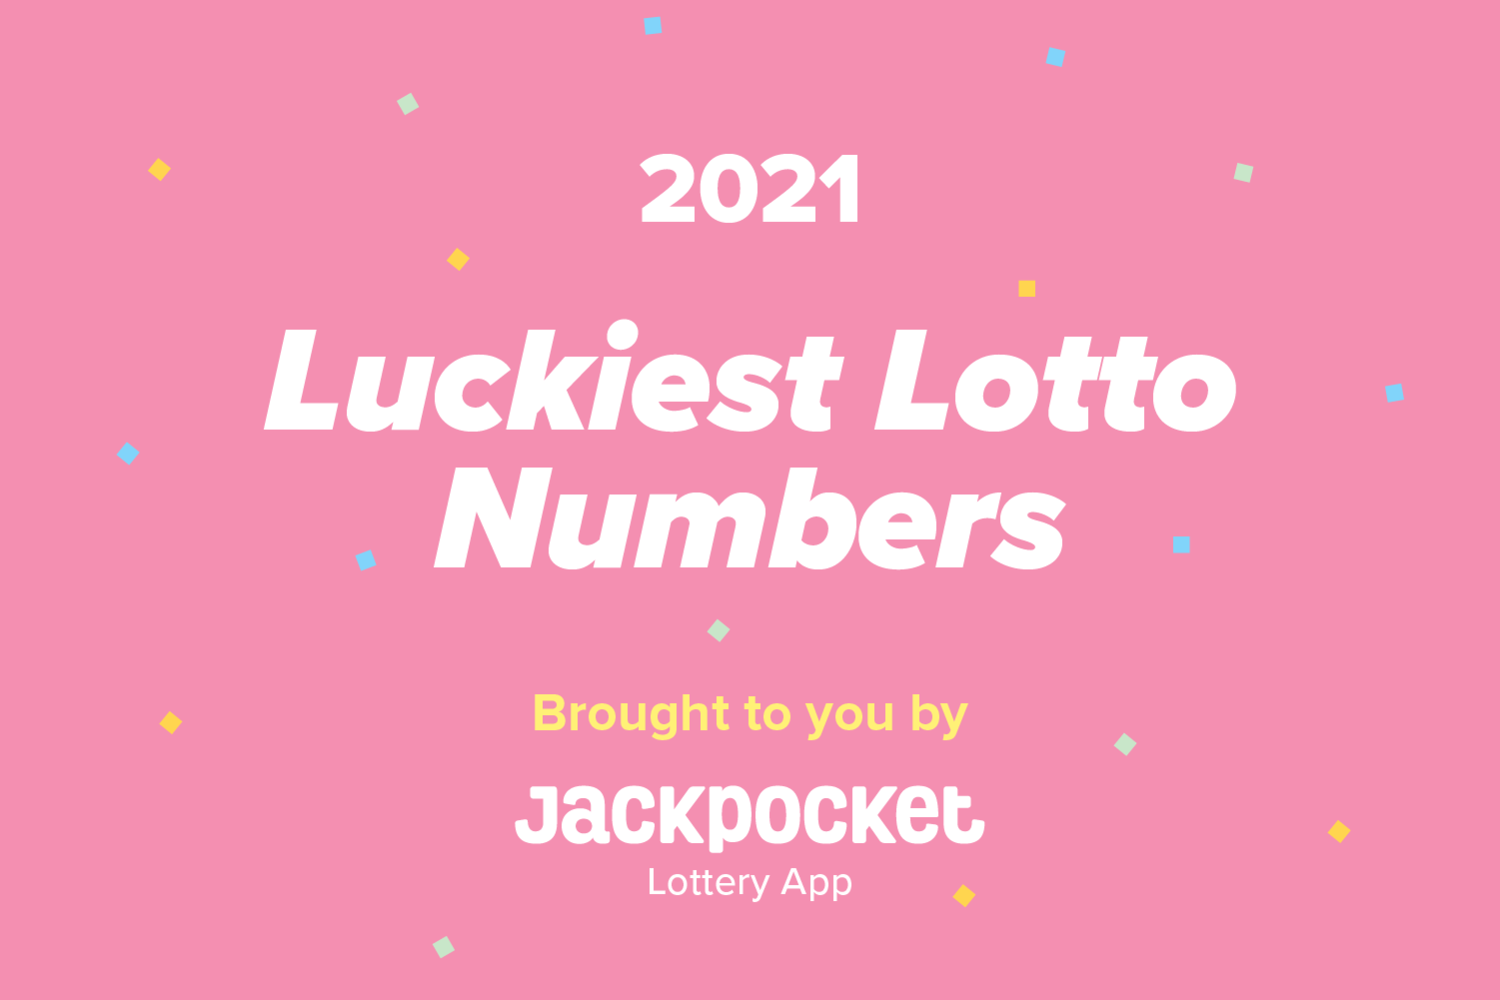 luckiest lottery numbers of 2021